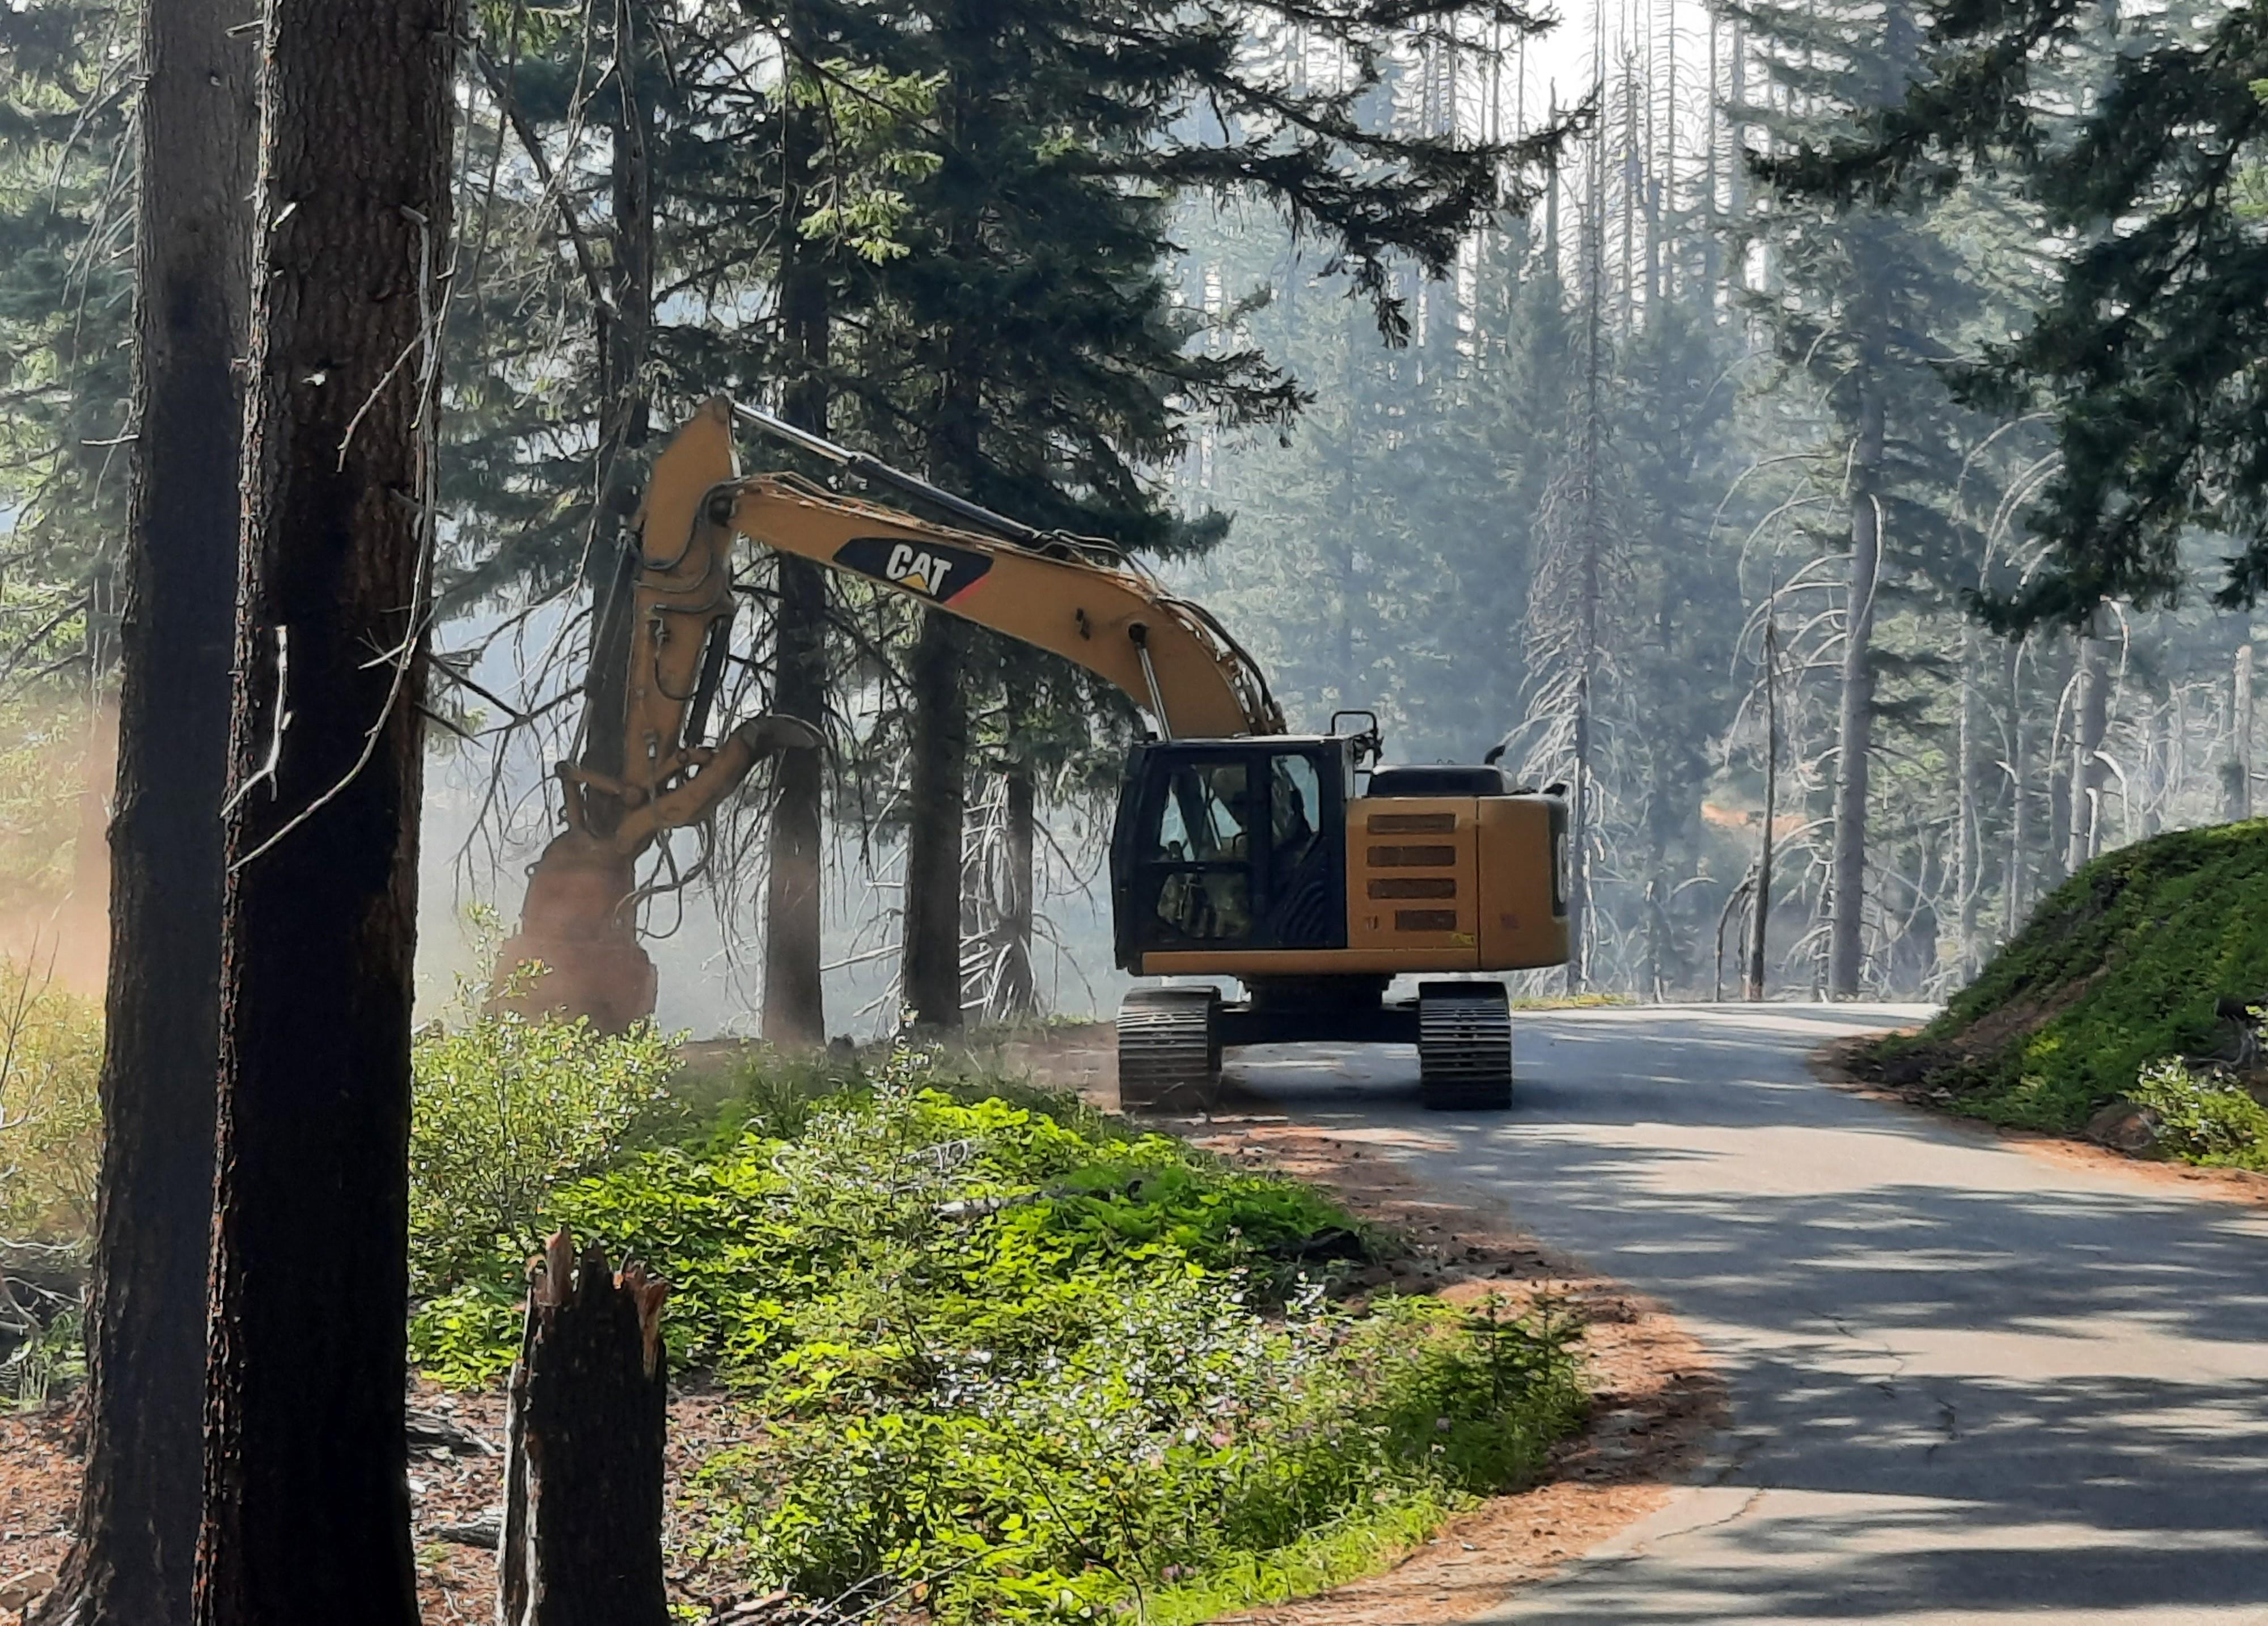 A yellow and black machine with a specialized cutting device tearing through brush along a paved road in the forest